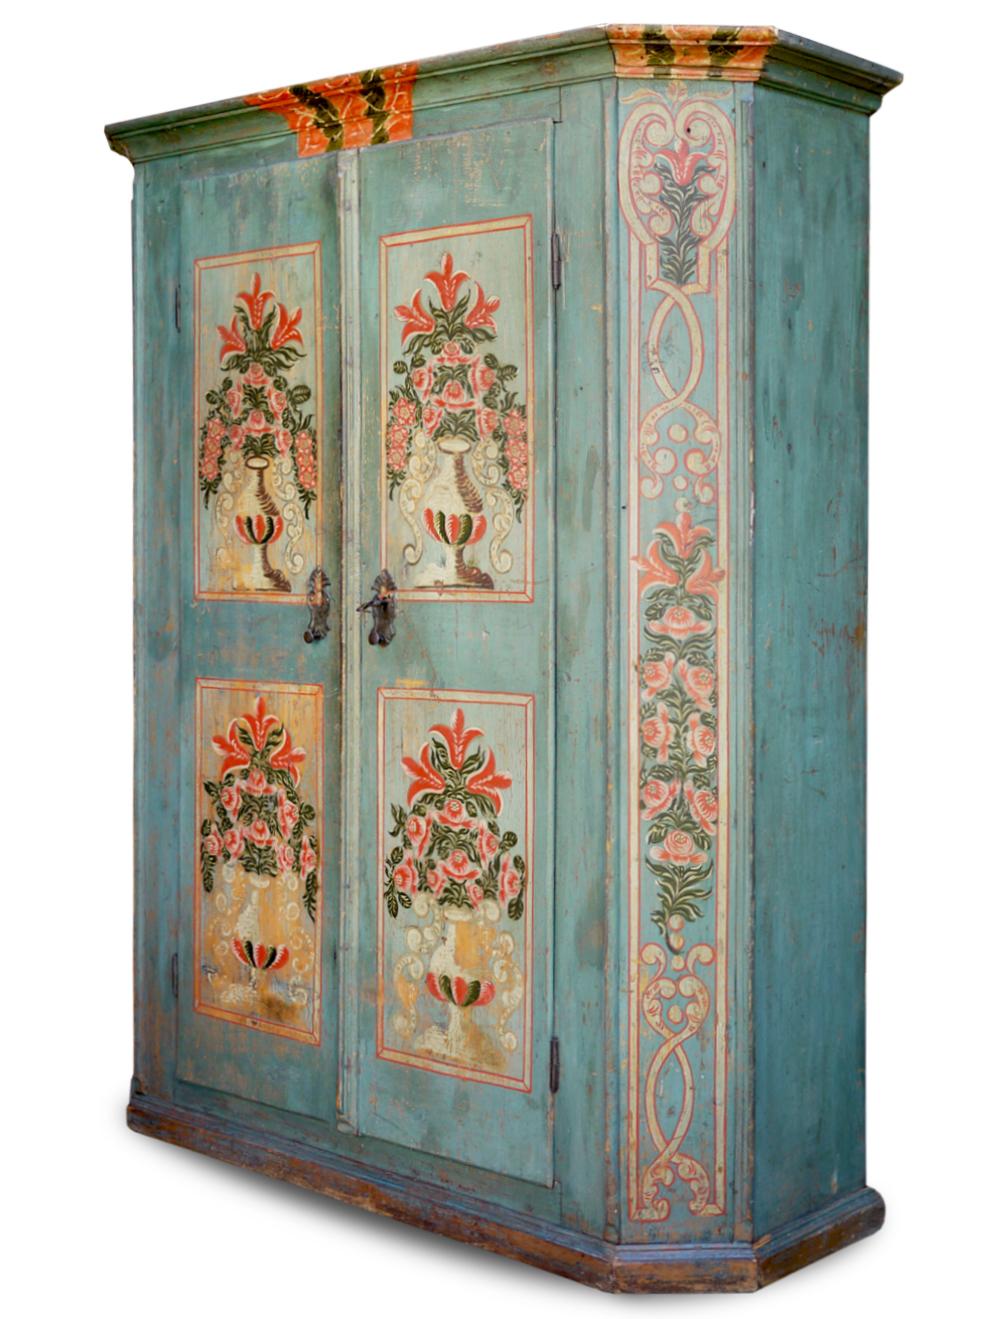 Antique Northern Italy painted wardrobe

Measures: H.182 cm - L.135 cm (145 cm to the frames) - P.47 cm (54 cm to the frames)

Two-door wardrobe, entirely painted in blue, has four panels on the doors depicting colorful cups of flowers on a blue